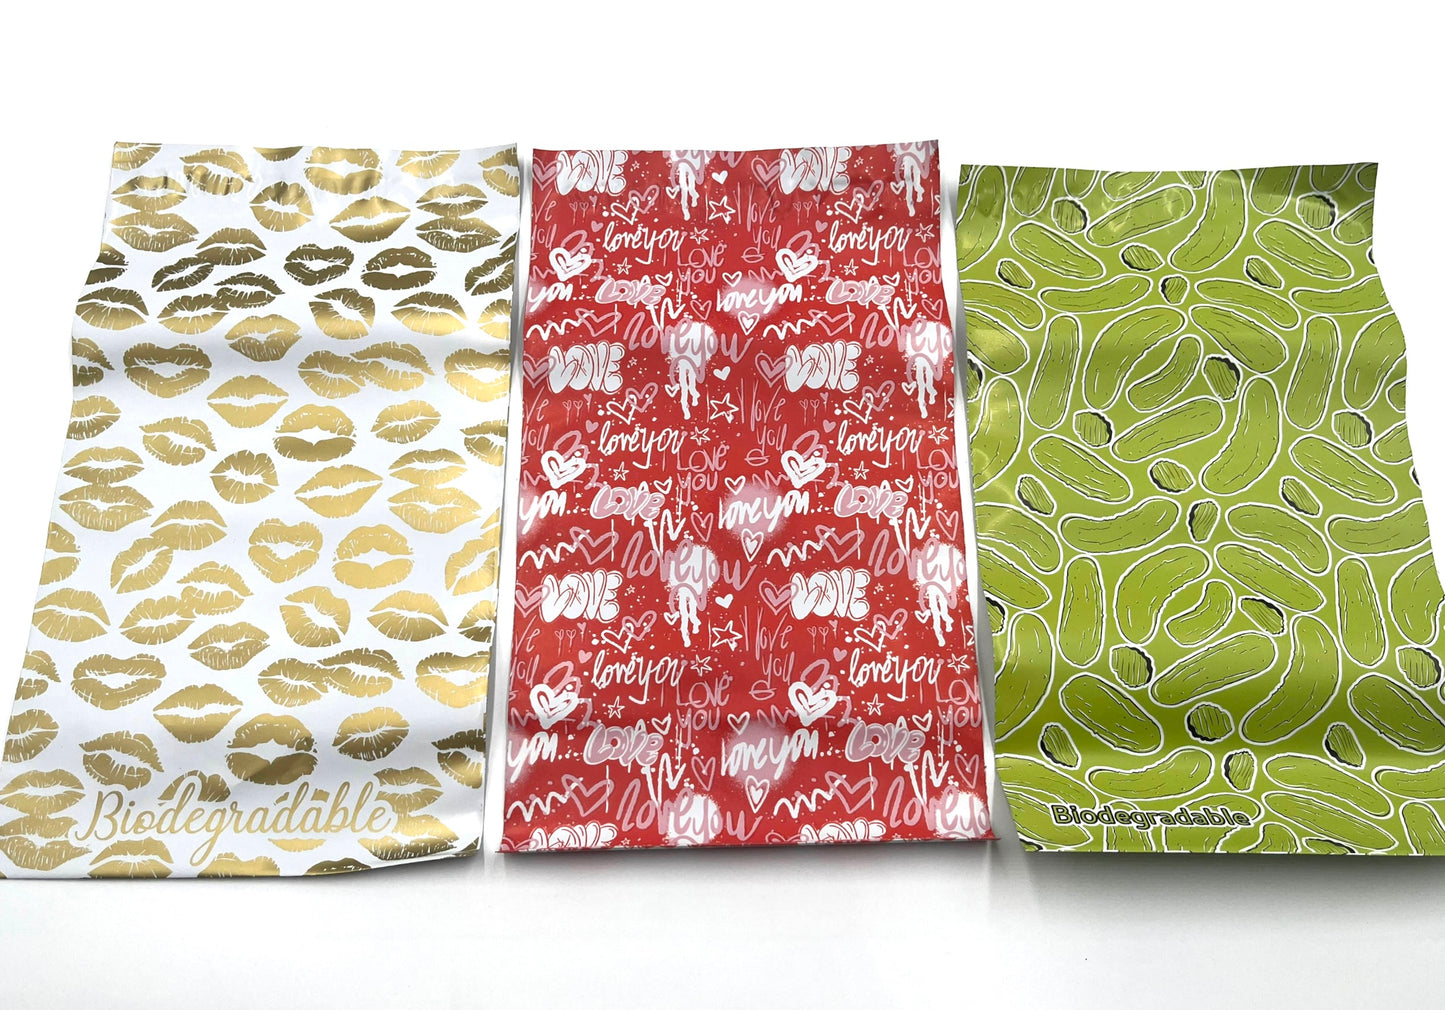 New Biodegradable Poly Mailers